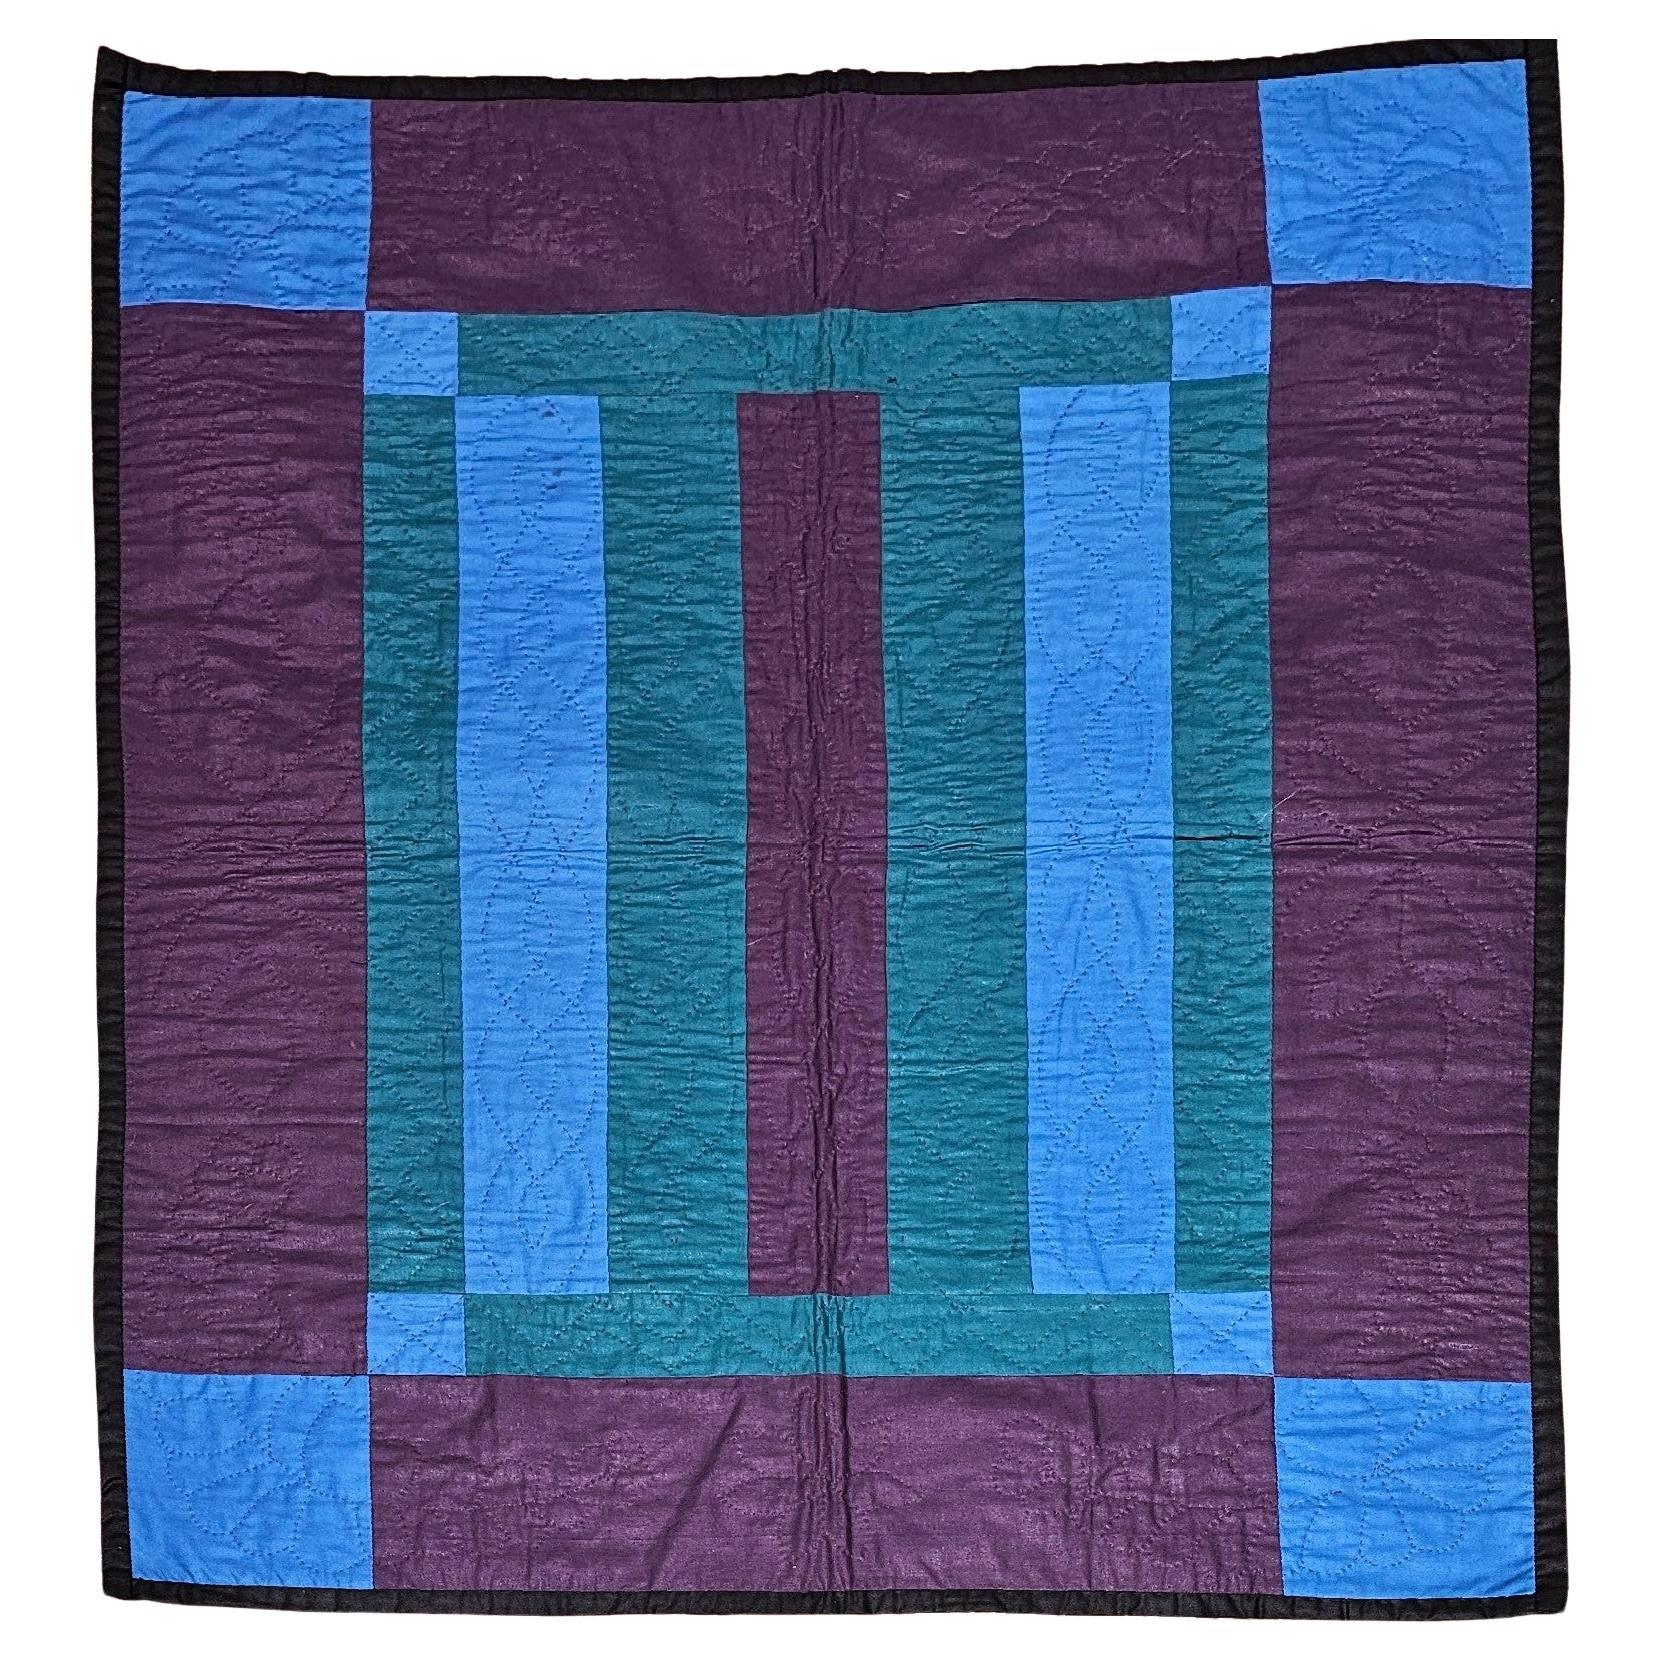 20th Century American Amish Bars Crib Quilt in Purple, Blue, Green. Brown 